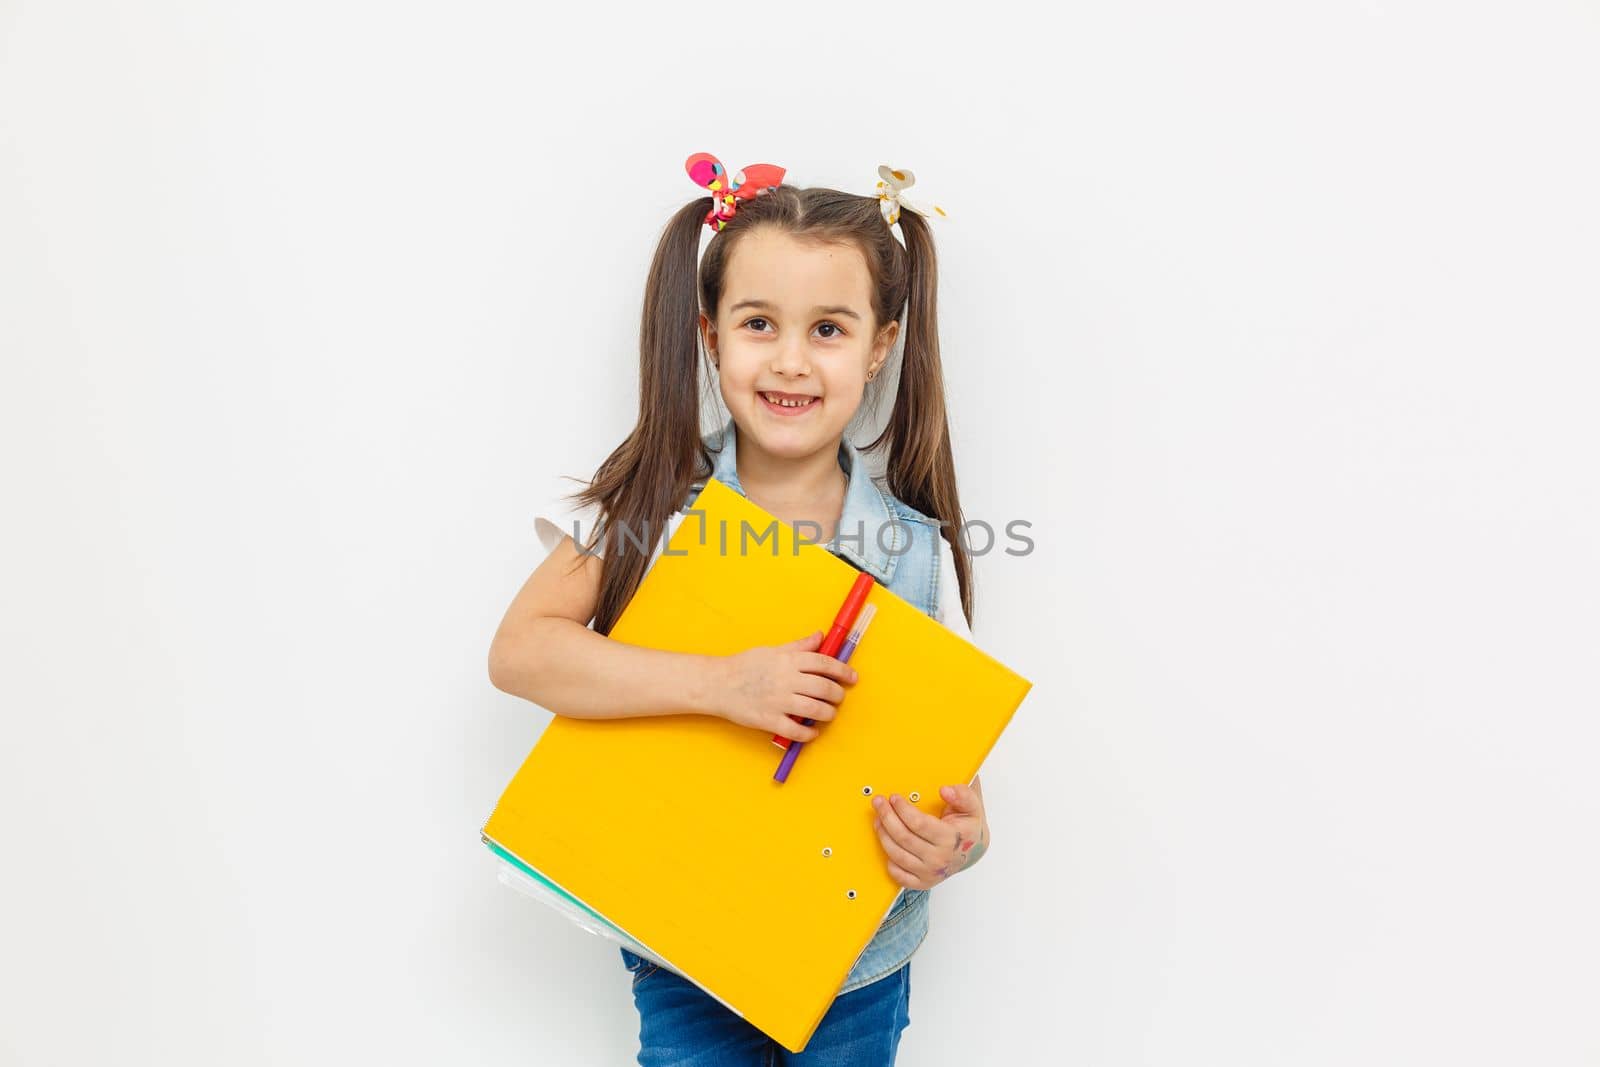 a cute little girl with two tails is holding a folder with papers in her hands. returning to school